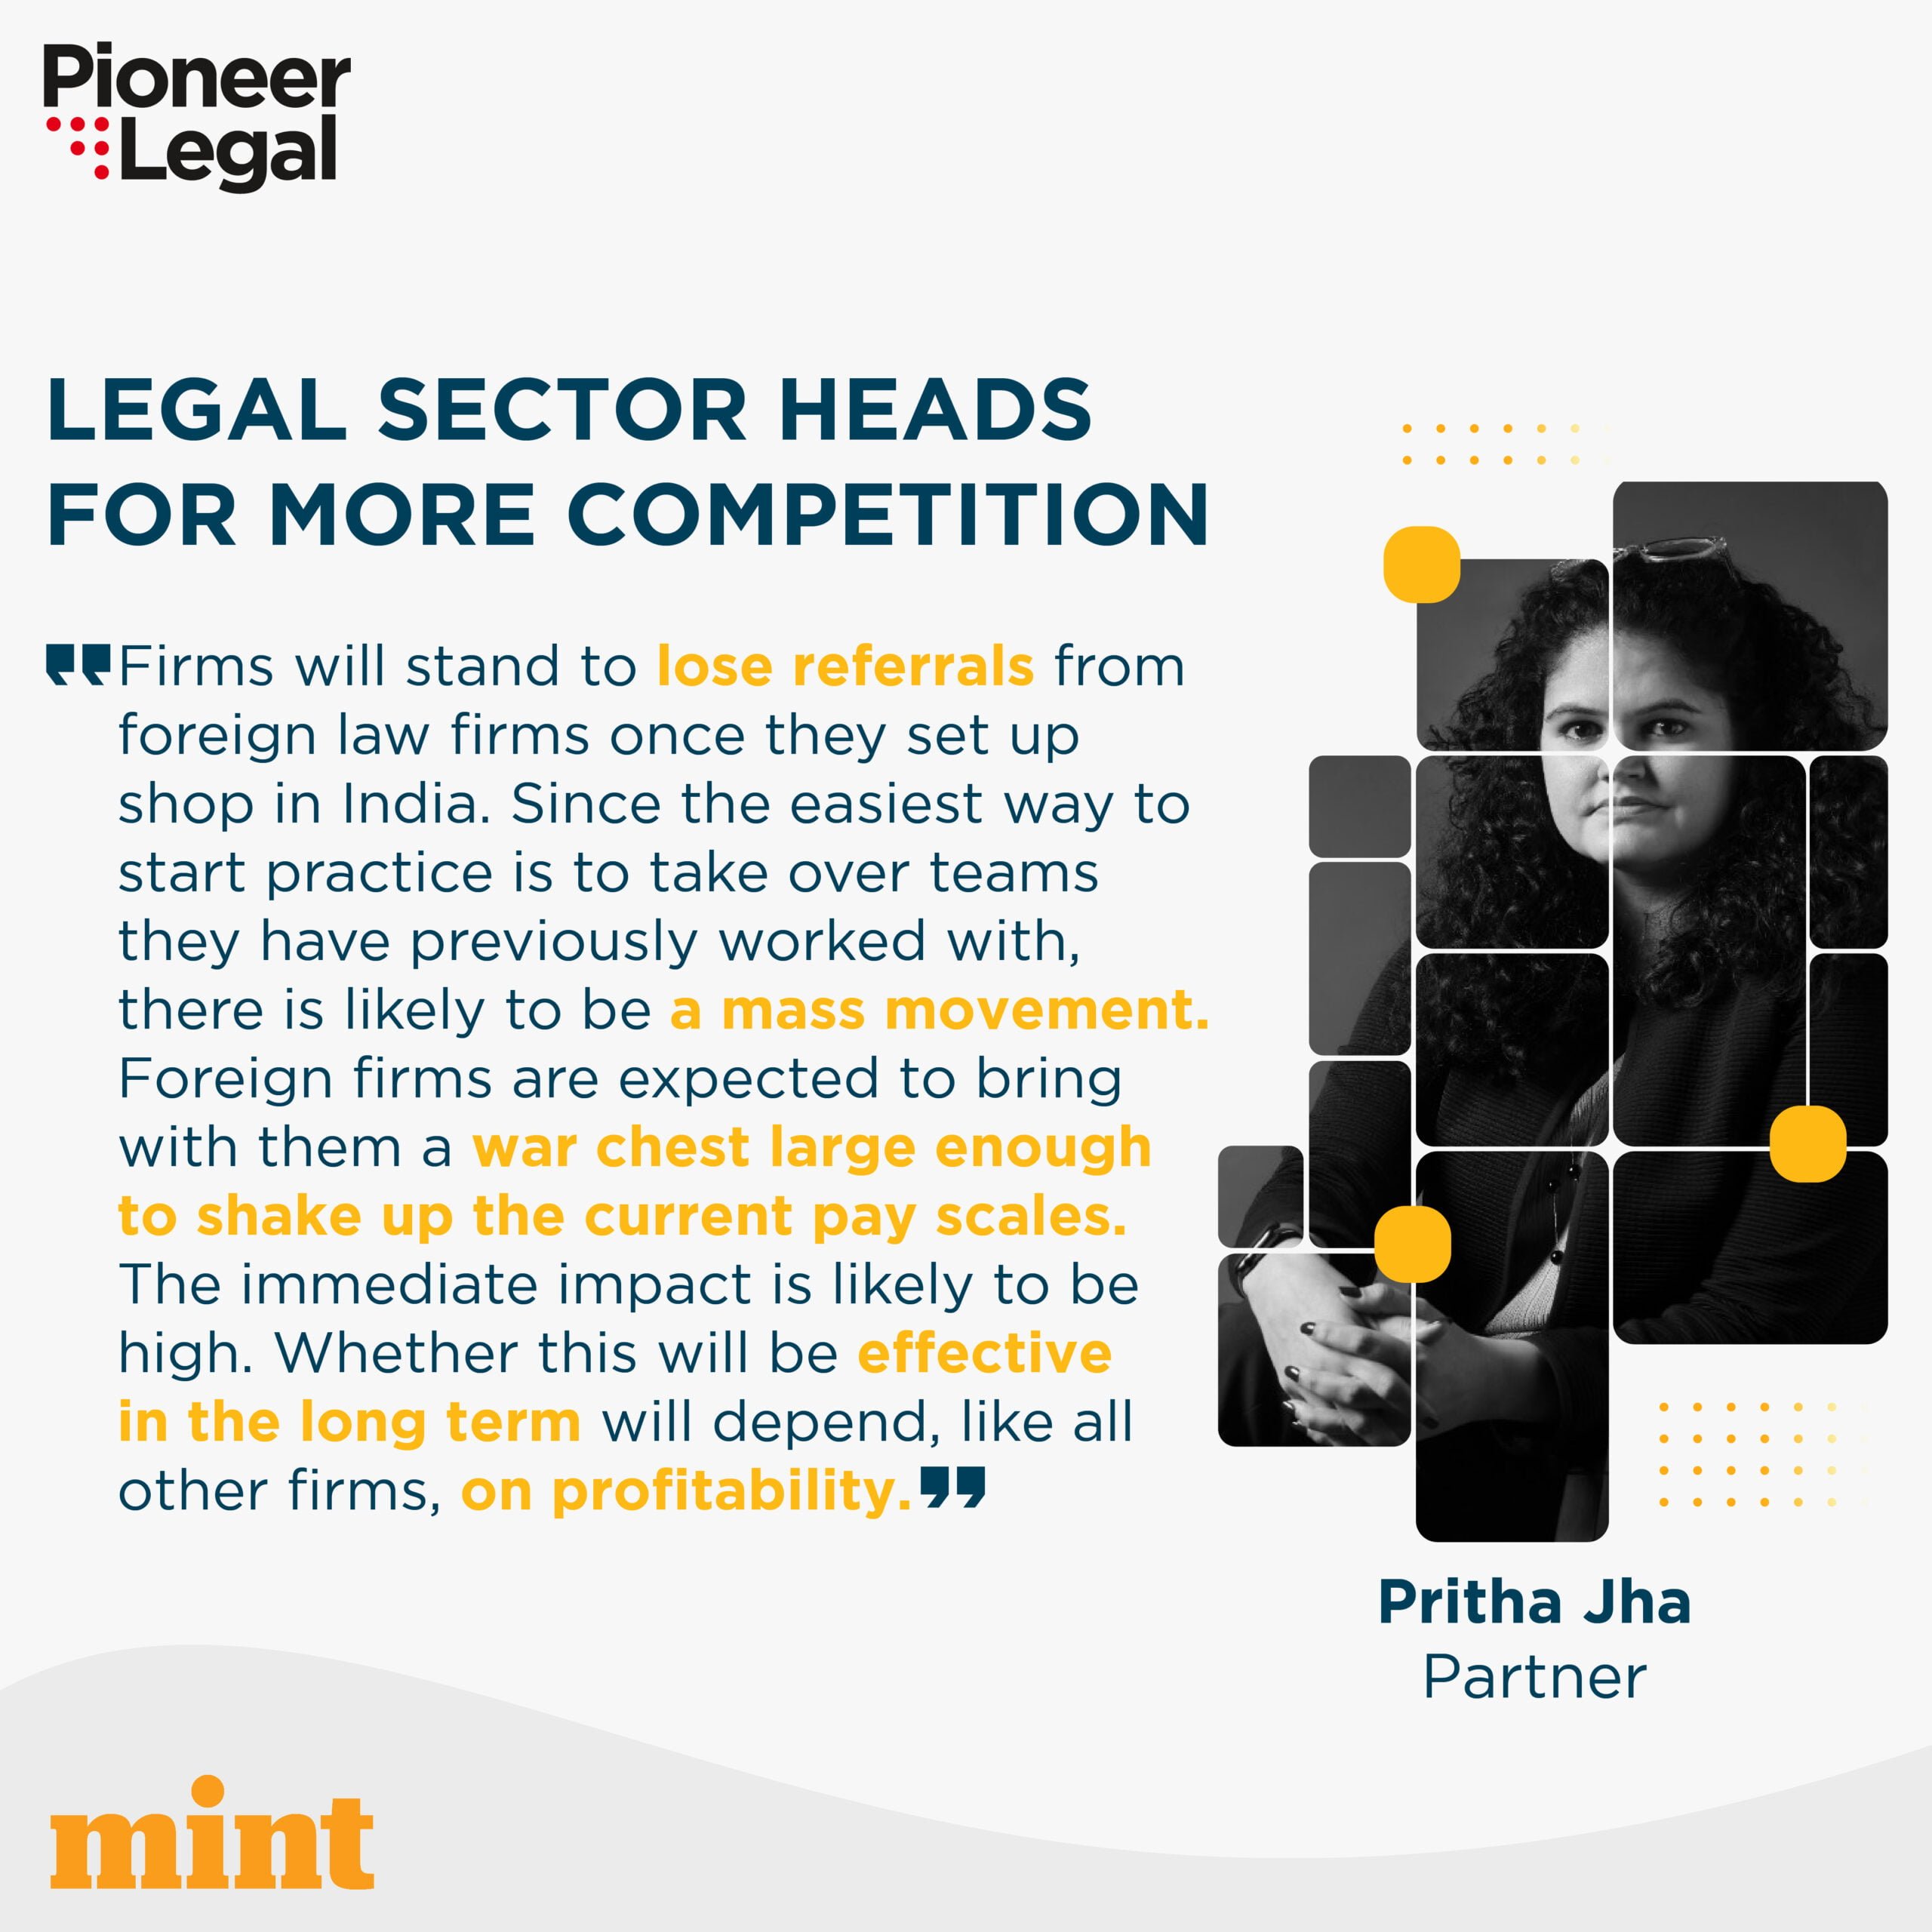 Pioneer Legal - Legal Sector heads for more competition